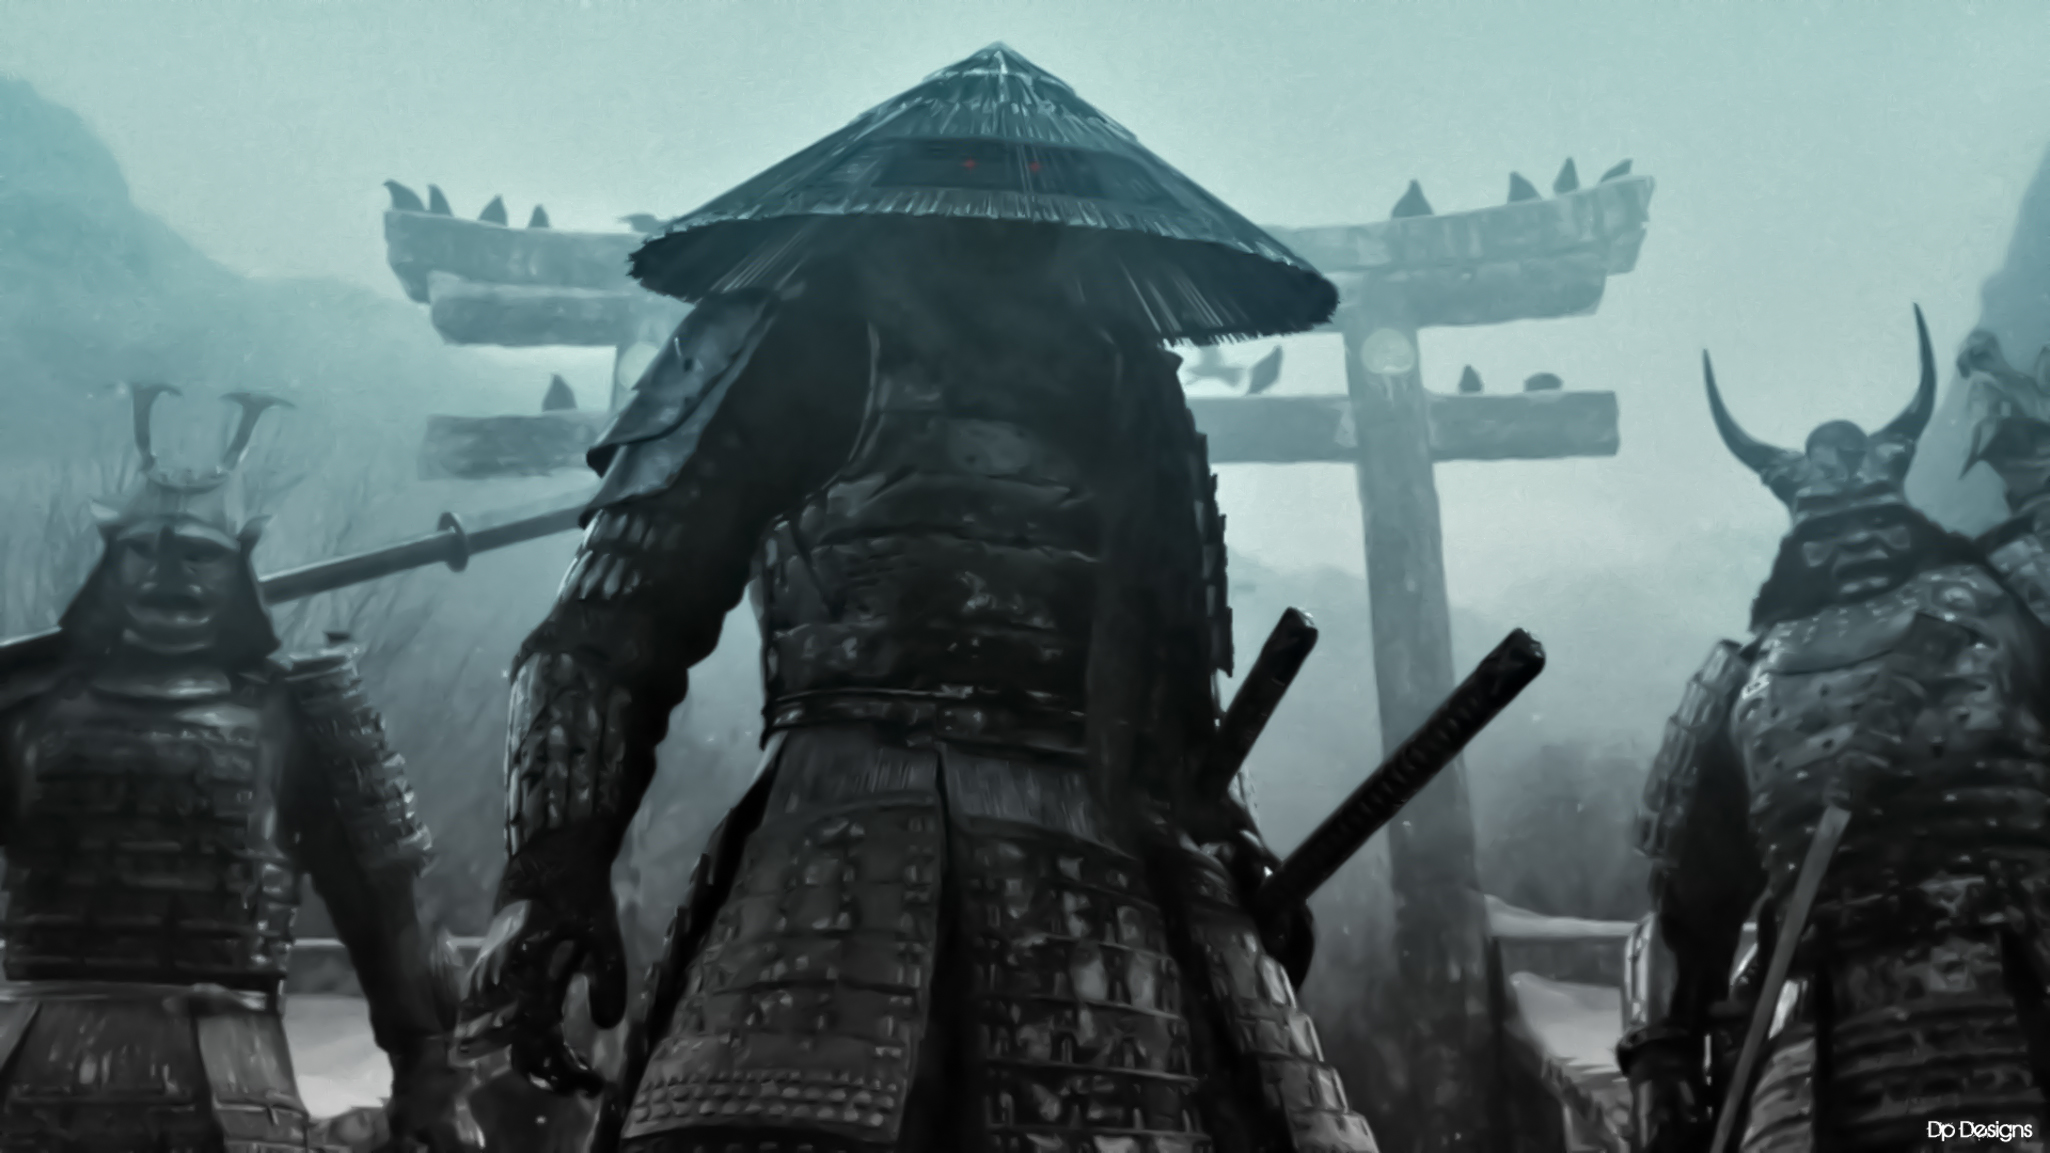 Samurai wallpapers for desktop, download free Samurai pictures and  backgrounds for PC 